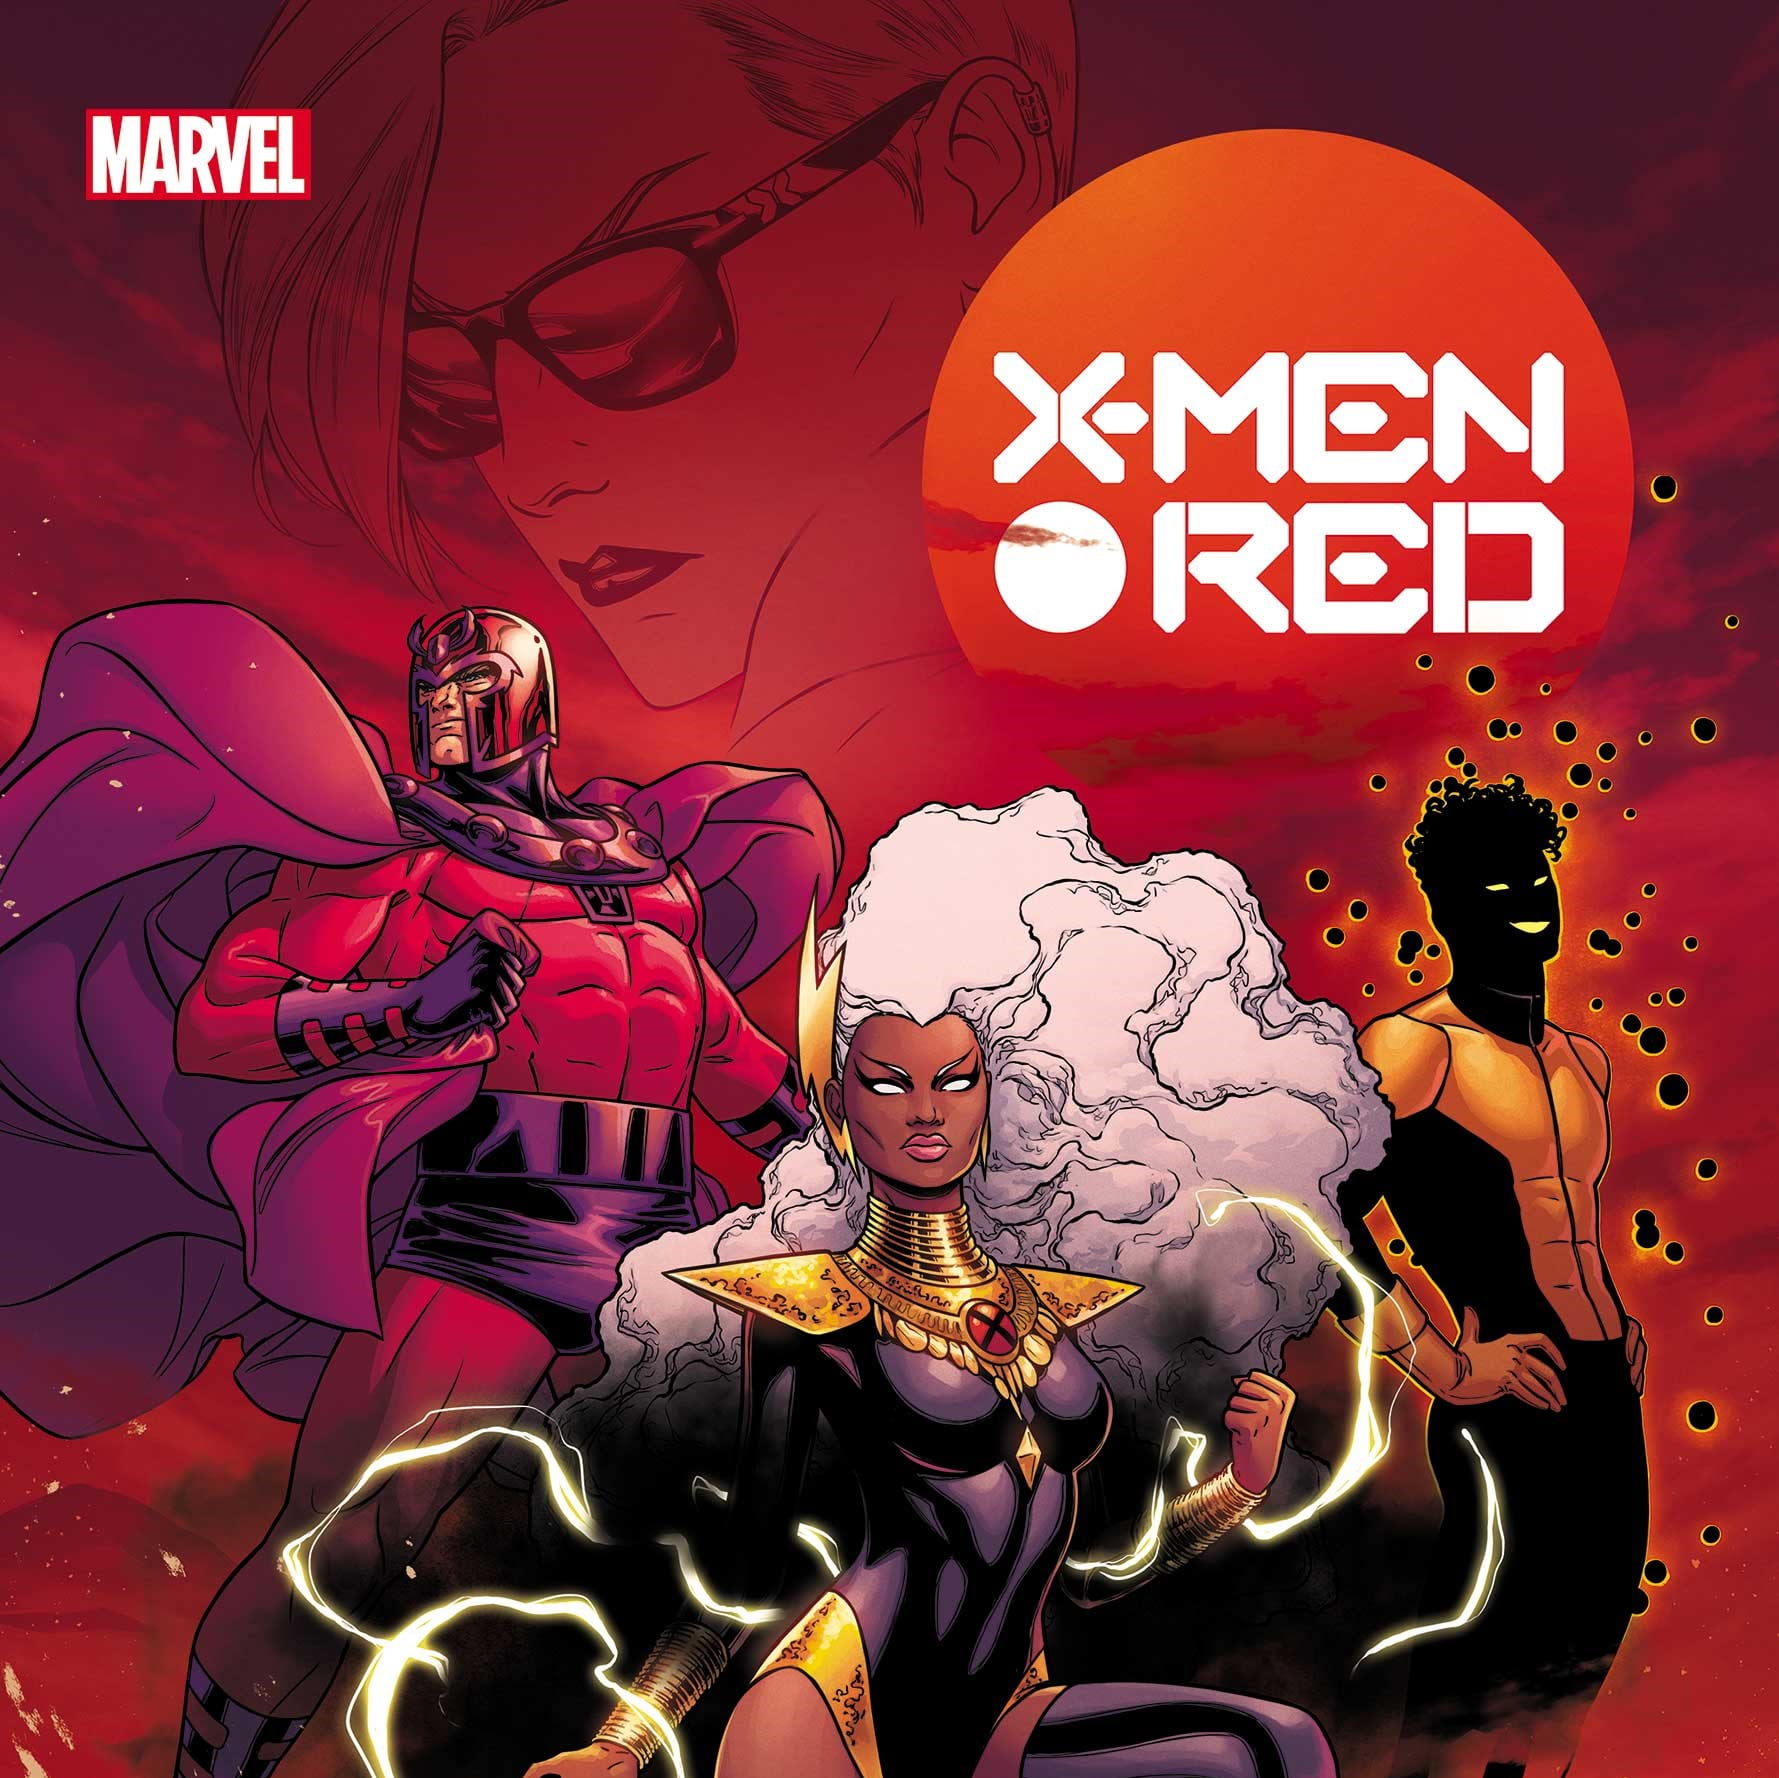 X-Men Red Cover Art via Russel Dauterman for Marvel Comics for use by 360 Magazine